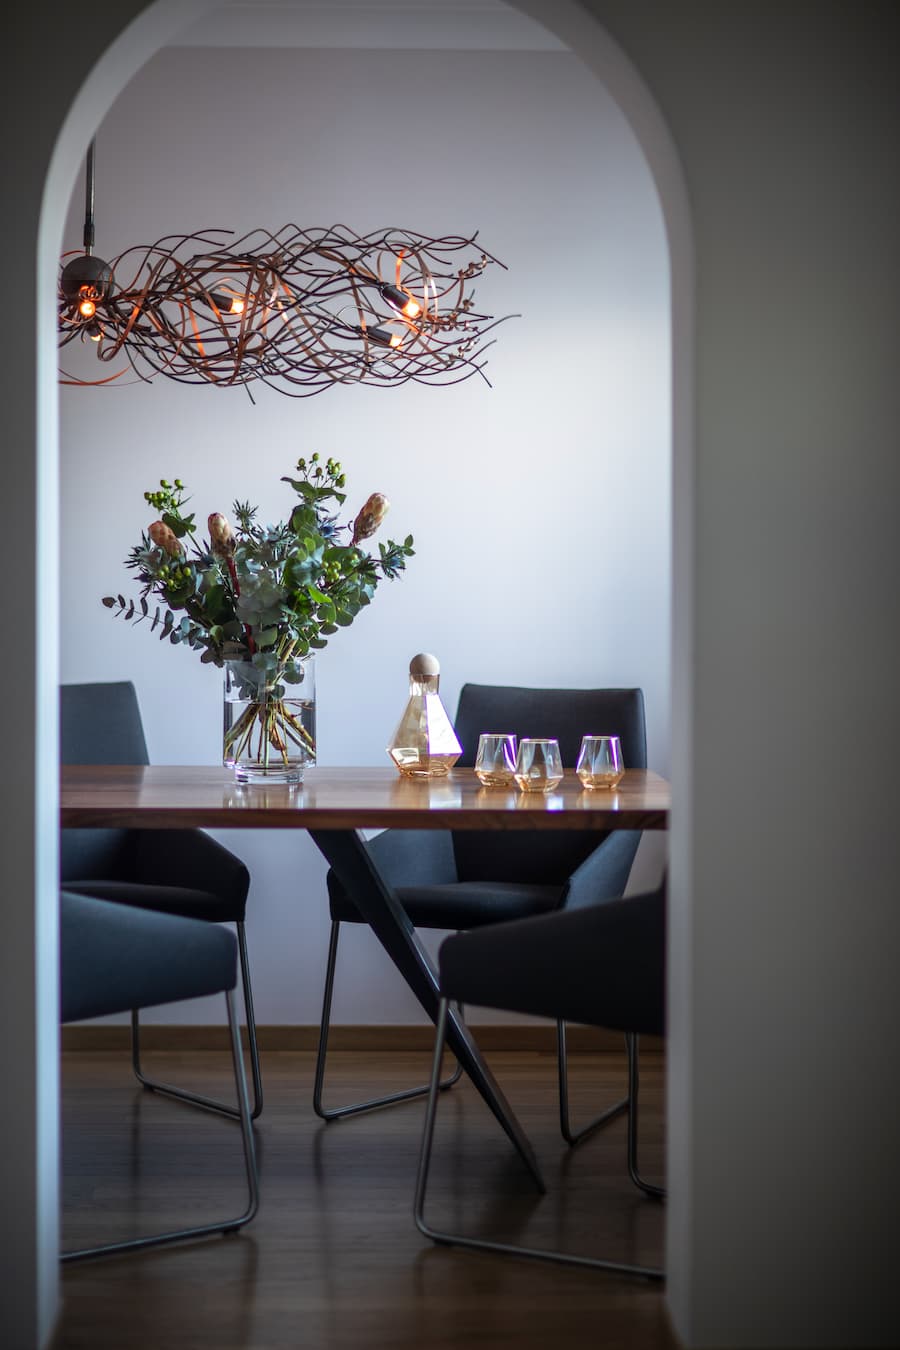 statement dining table through an archway with dramatic lighting positioned above